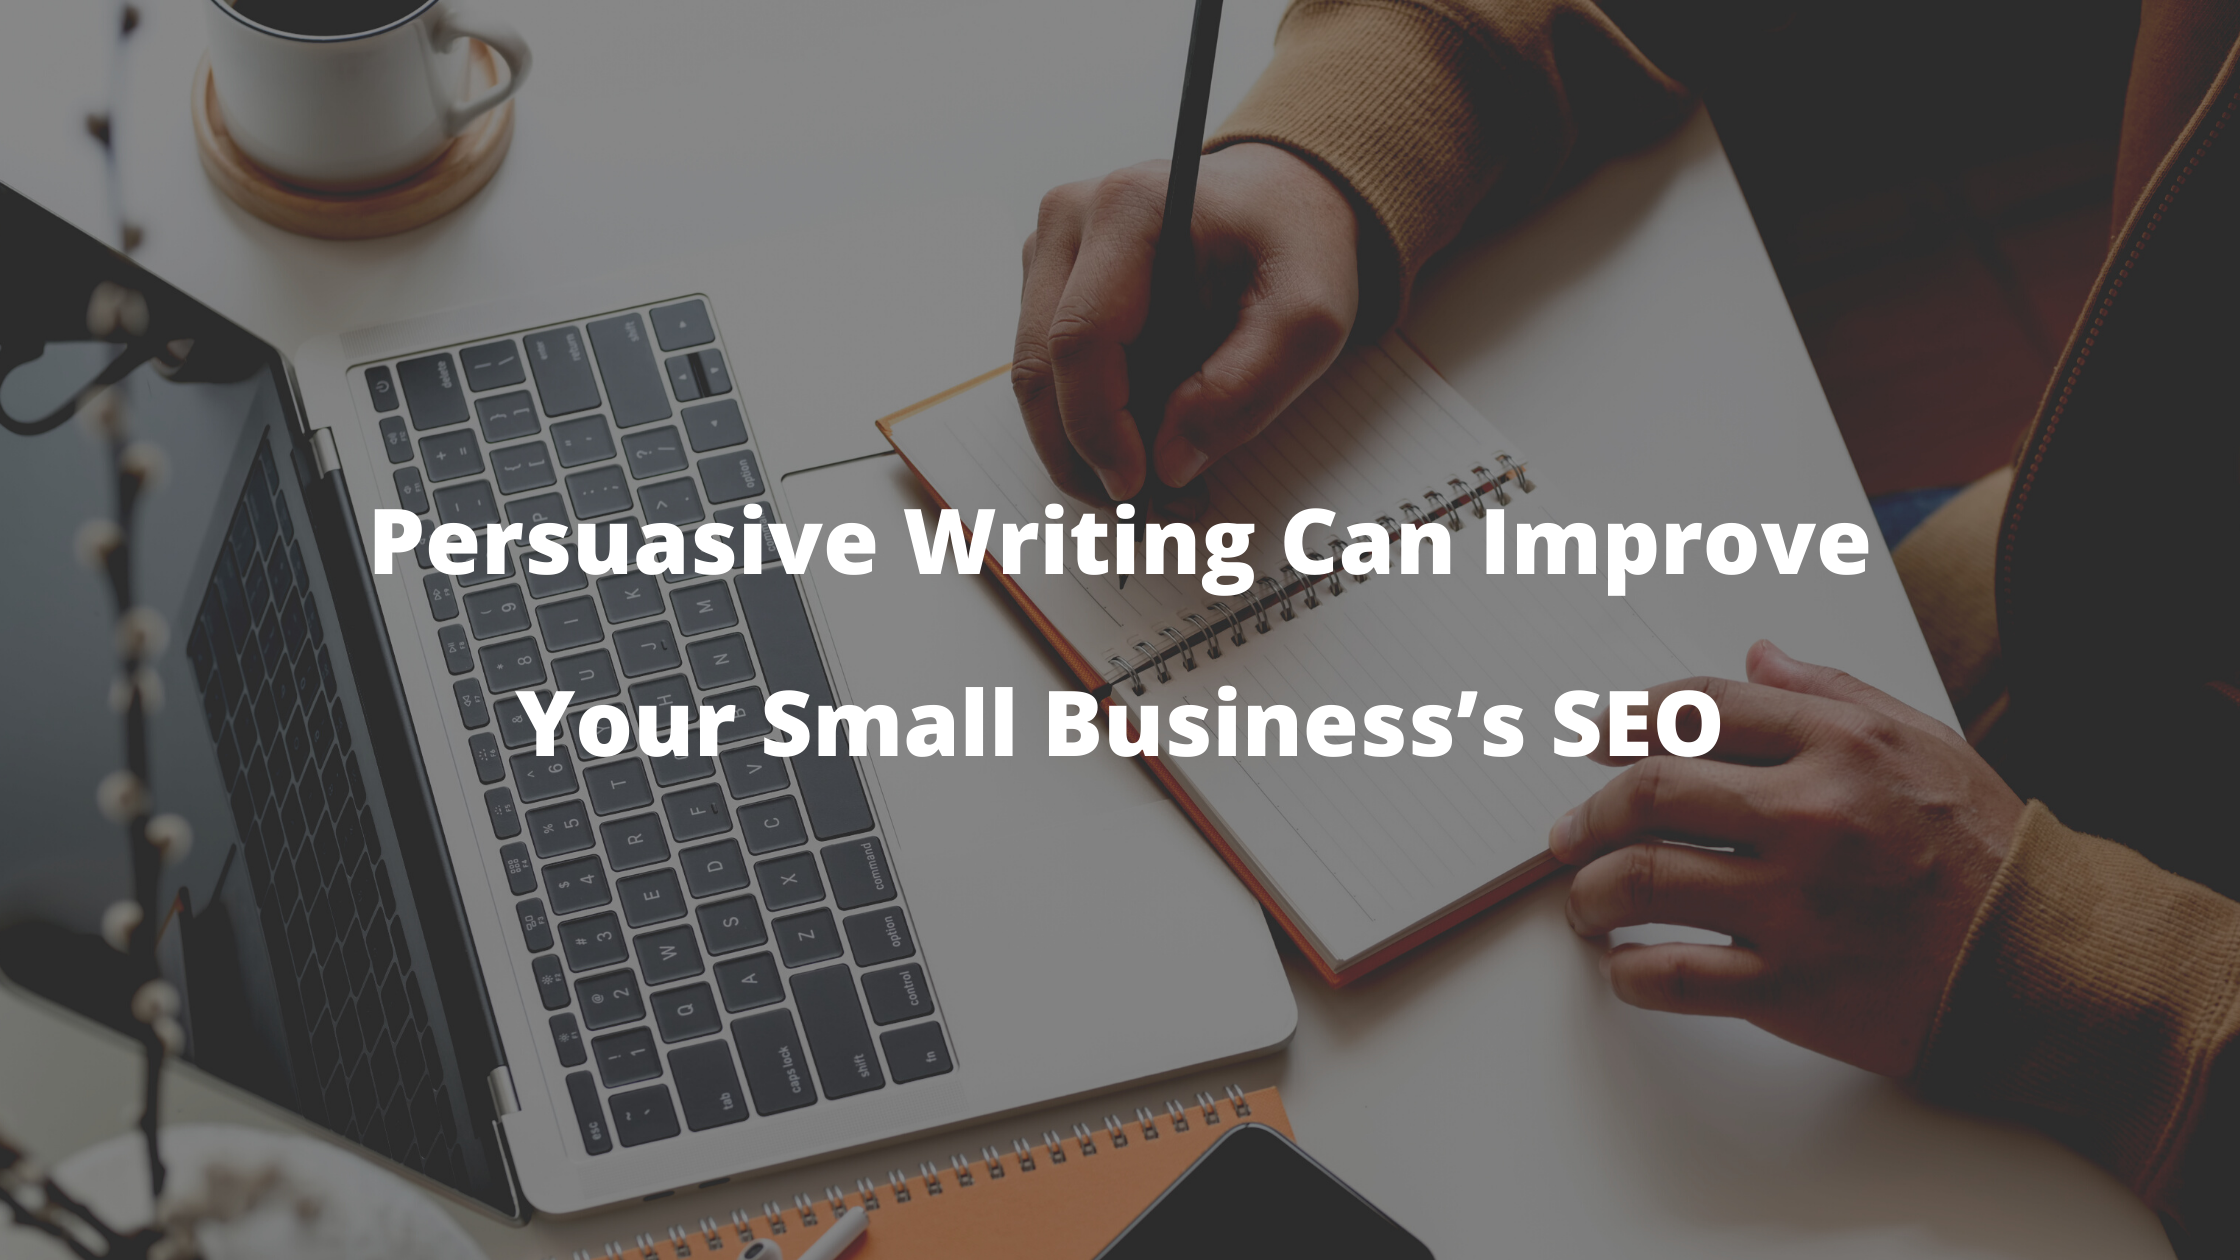 Persuasive Writing Can Improve Your Small Business’s SEO